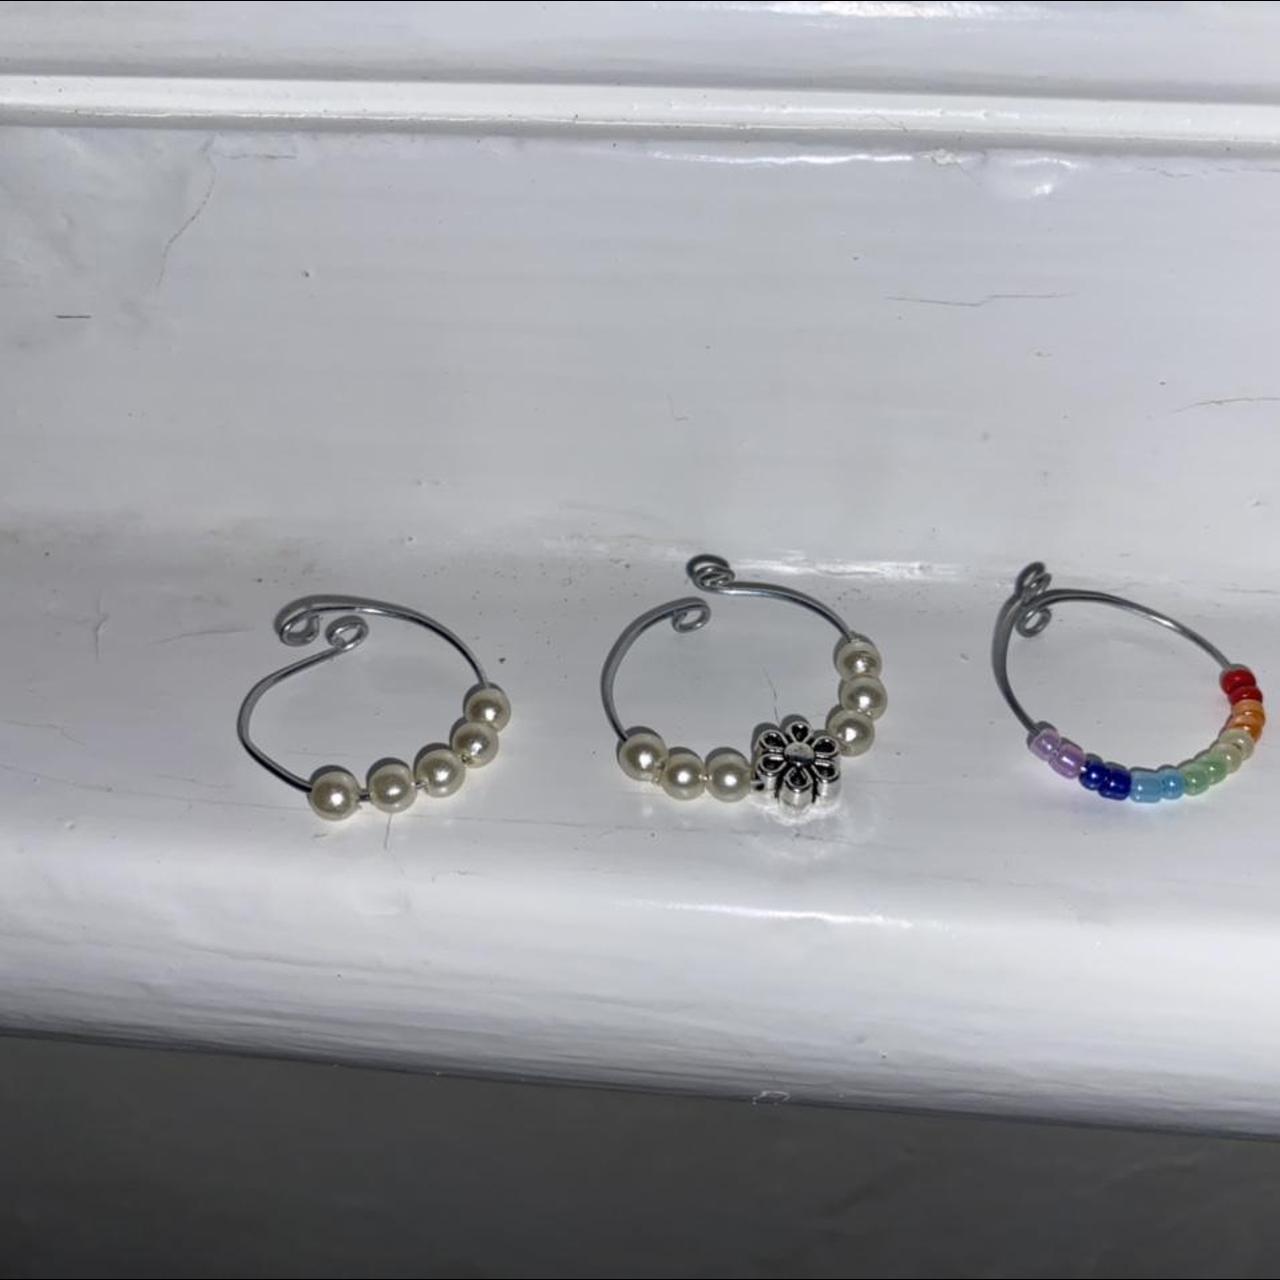 Product Image 1 - Anxiety rings!
Please message me which